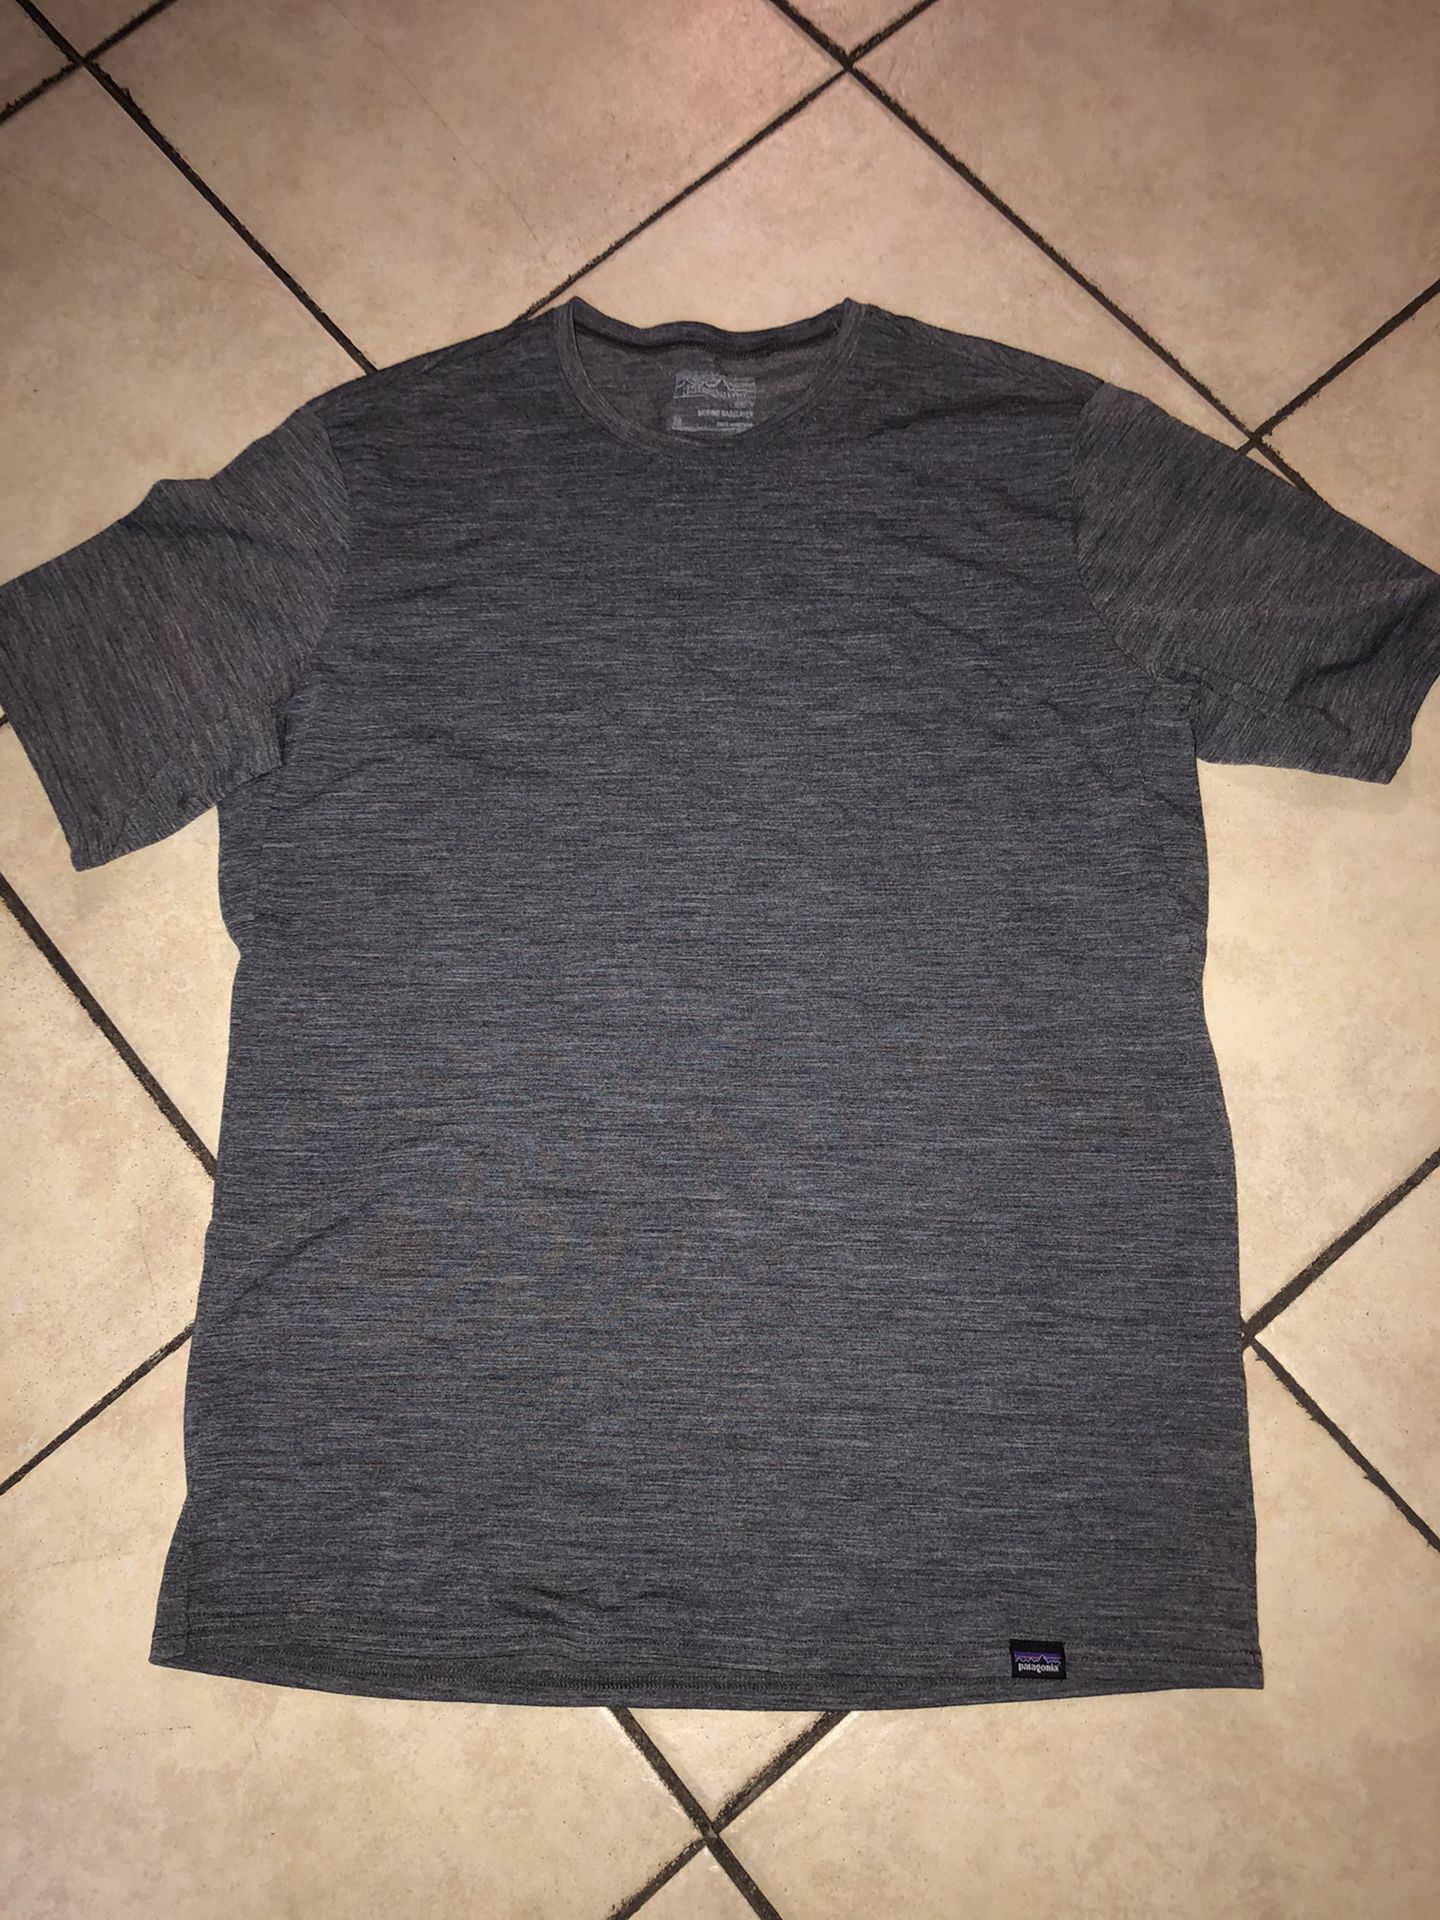 Sz small Patagonia work out shirt